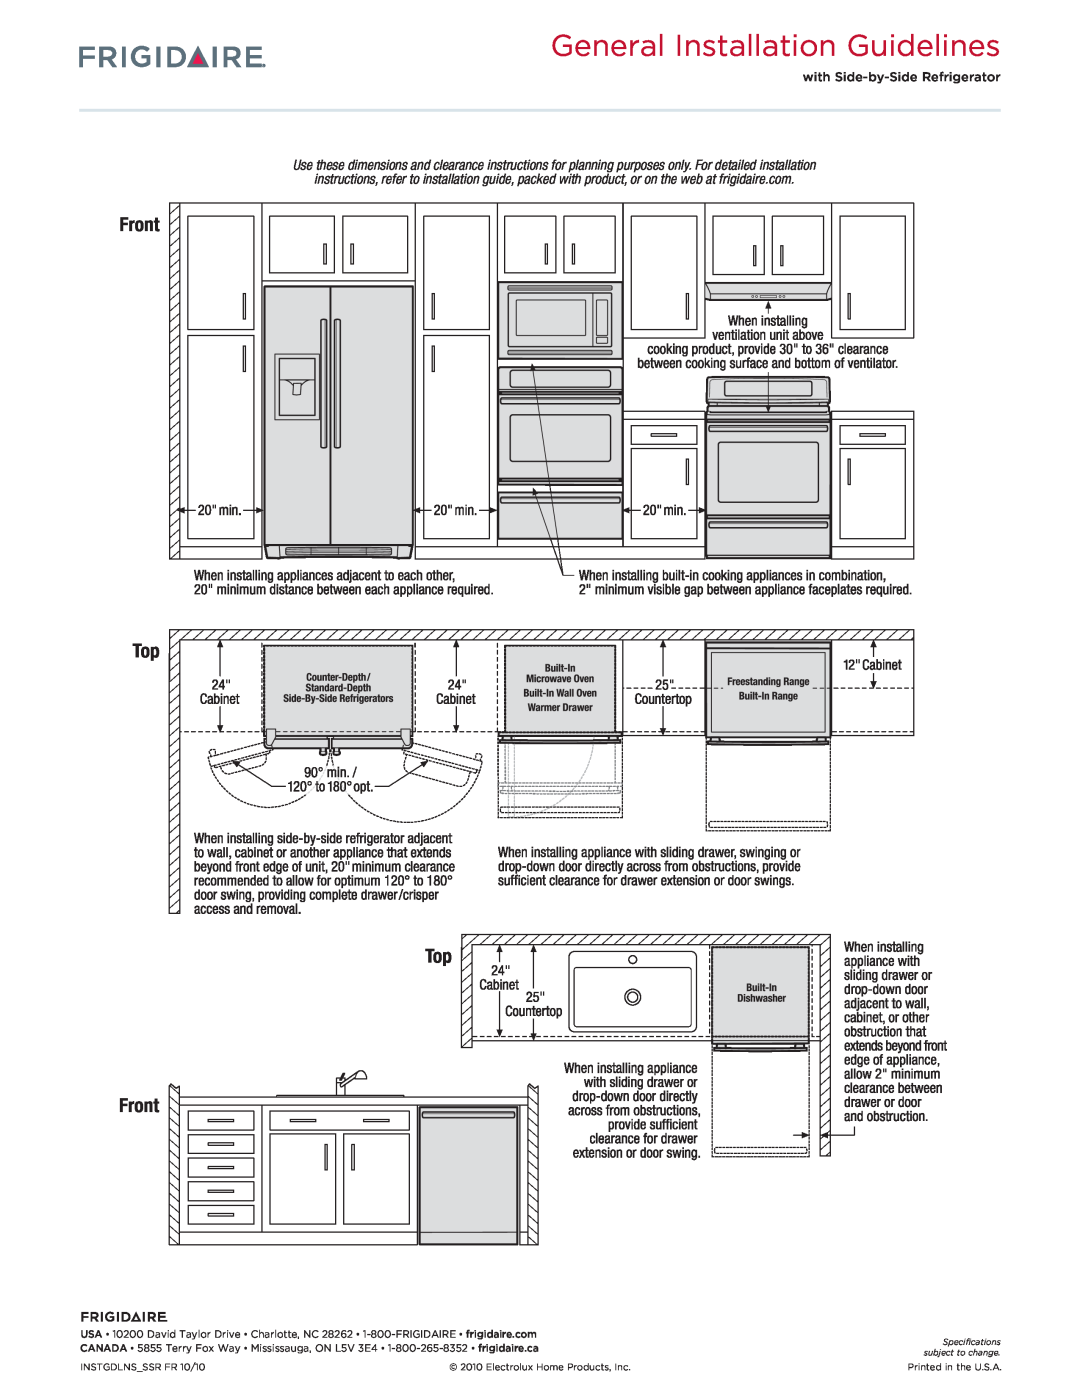 Frigidaire FPMC2785K F dimensions General Installation Guidelines, Top Front 